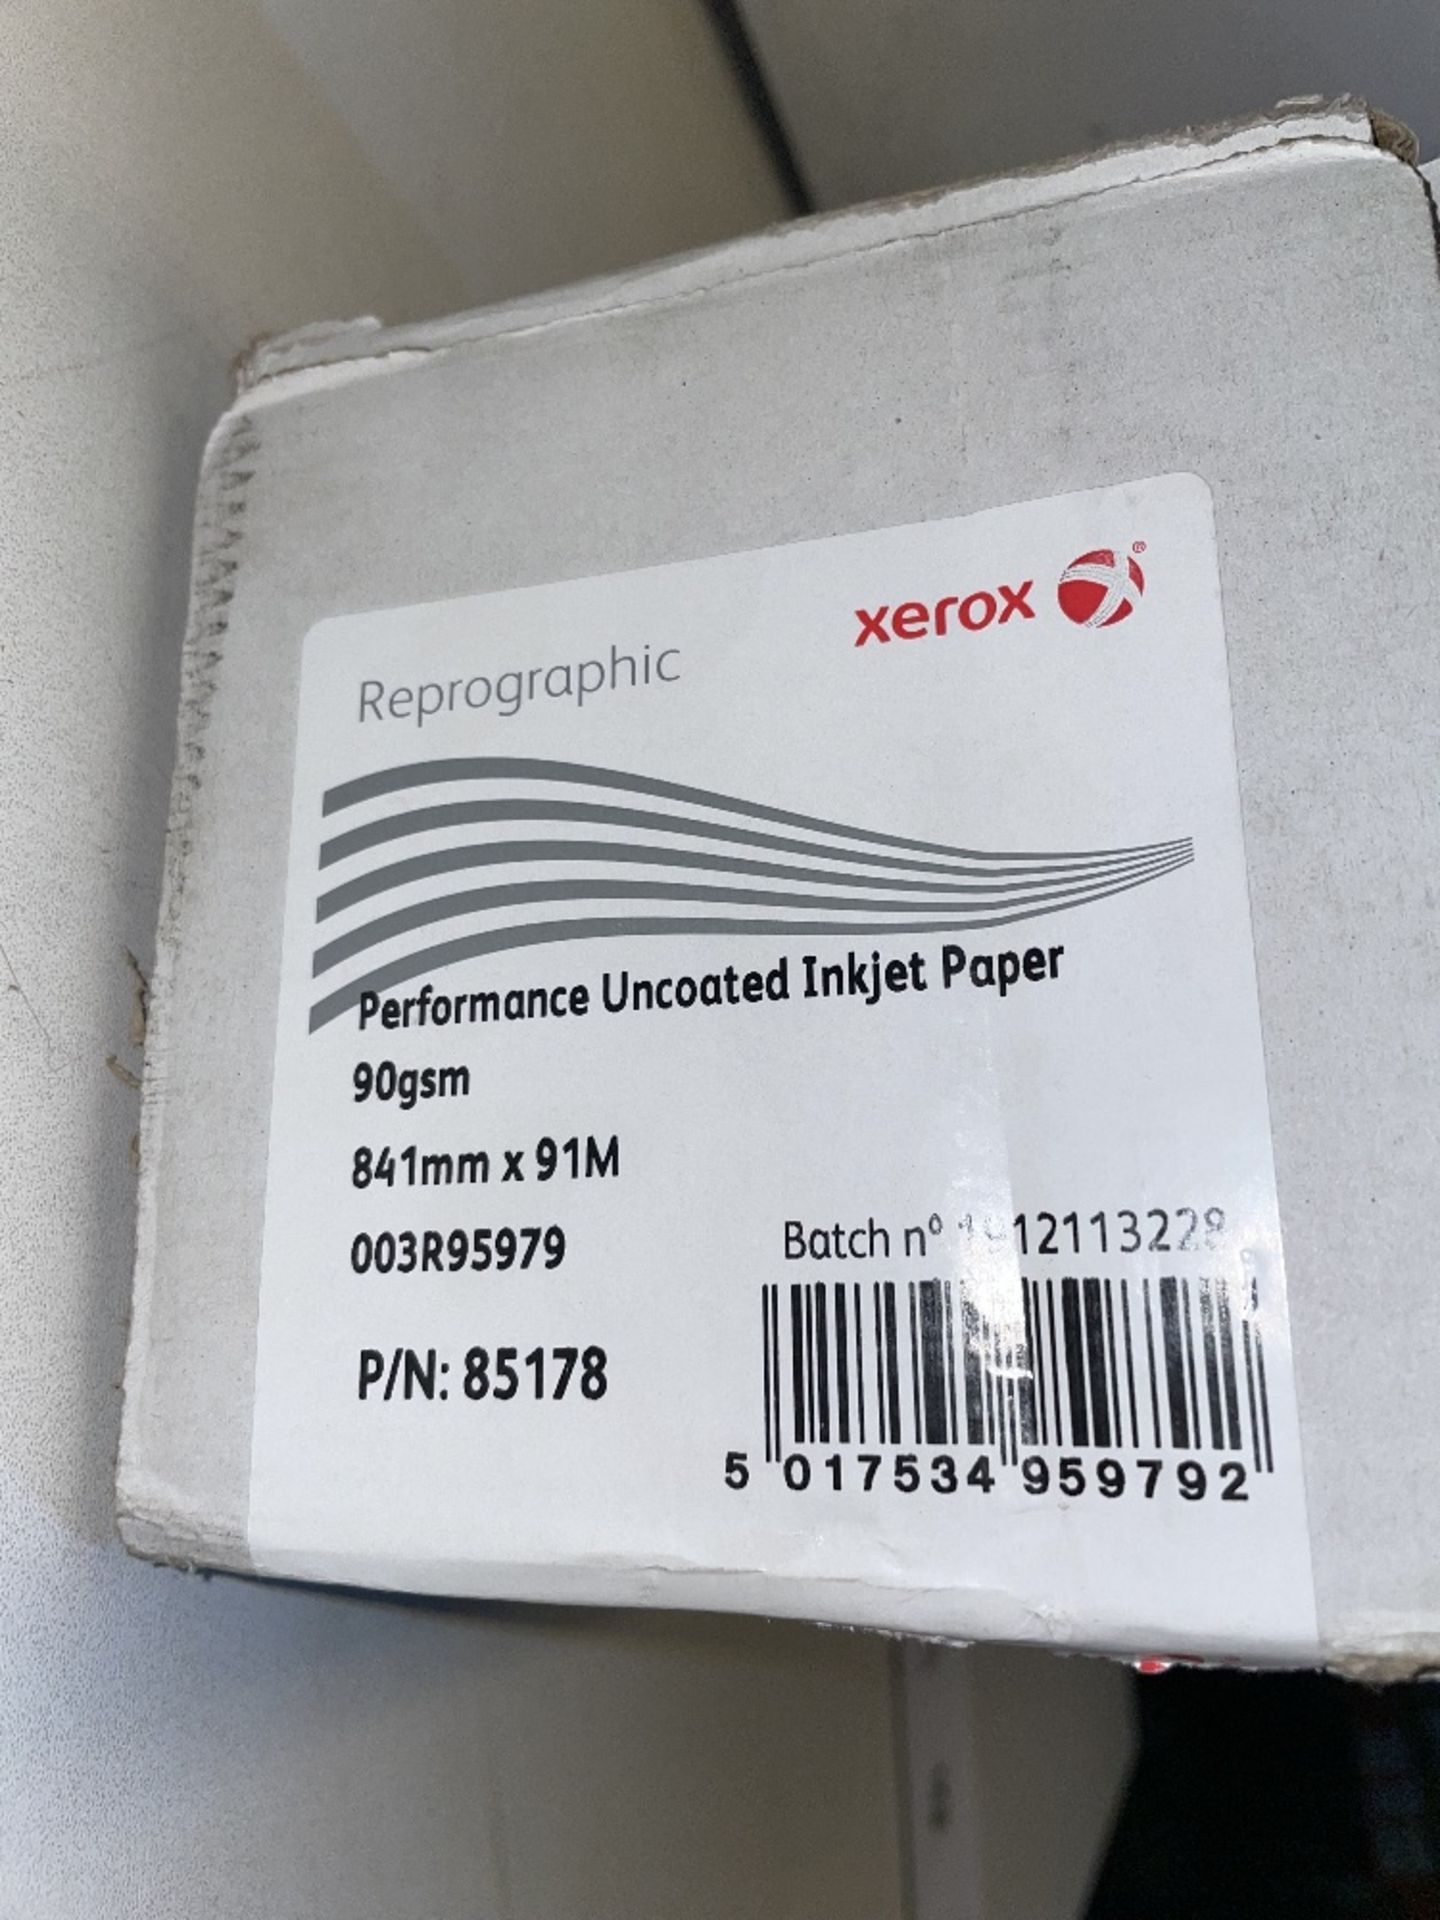 91m Roll of Xerox 85178 Reprographic Performance Uncoated Inkjet Paper - Image 3 of 3